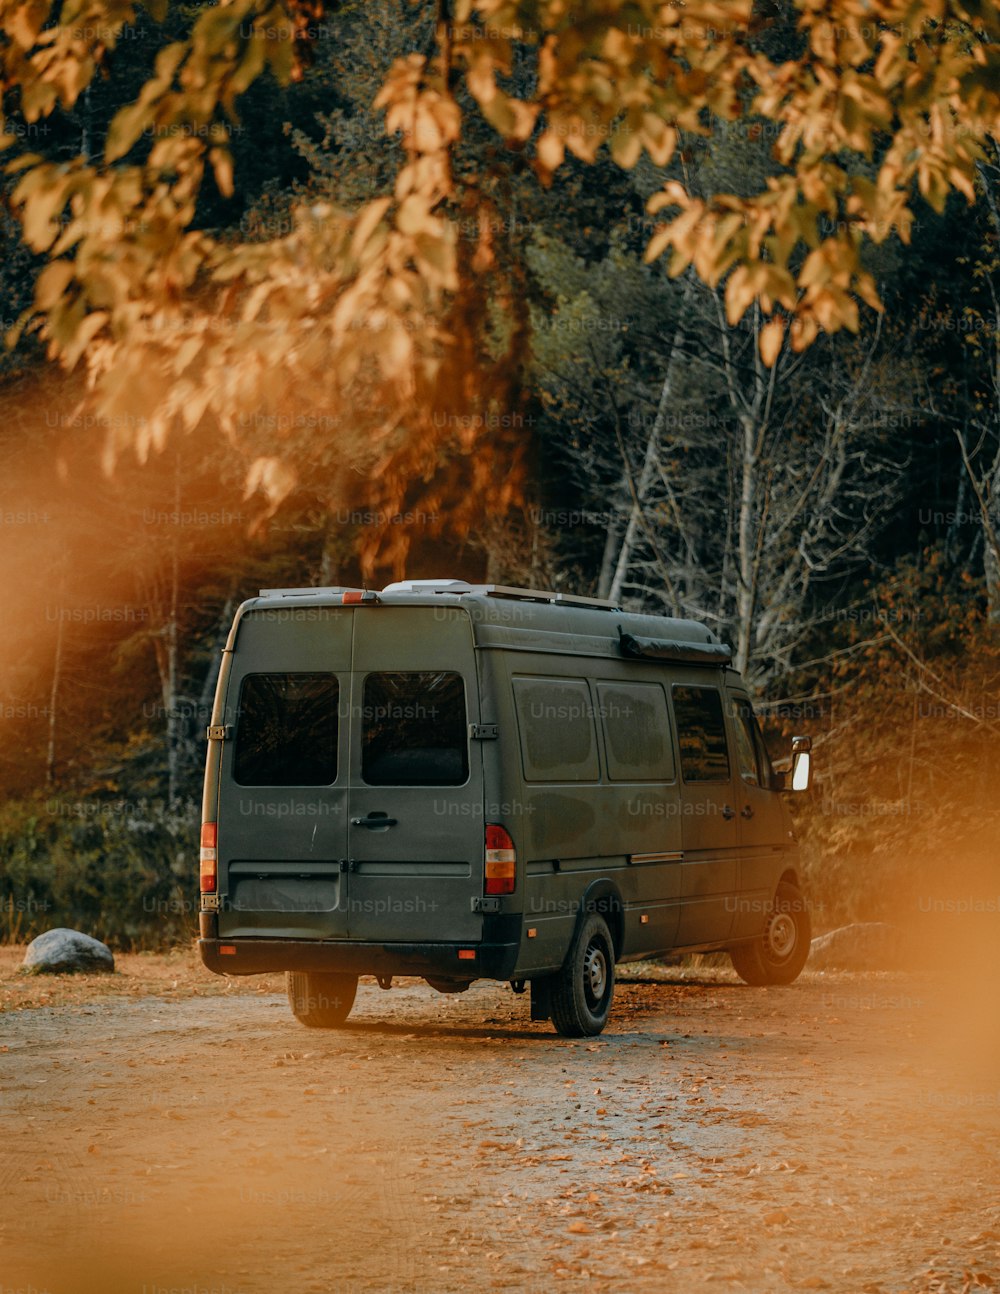 a van is parked on the side of a dirt road